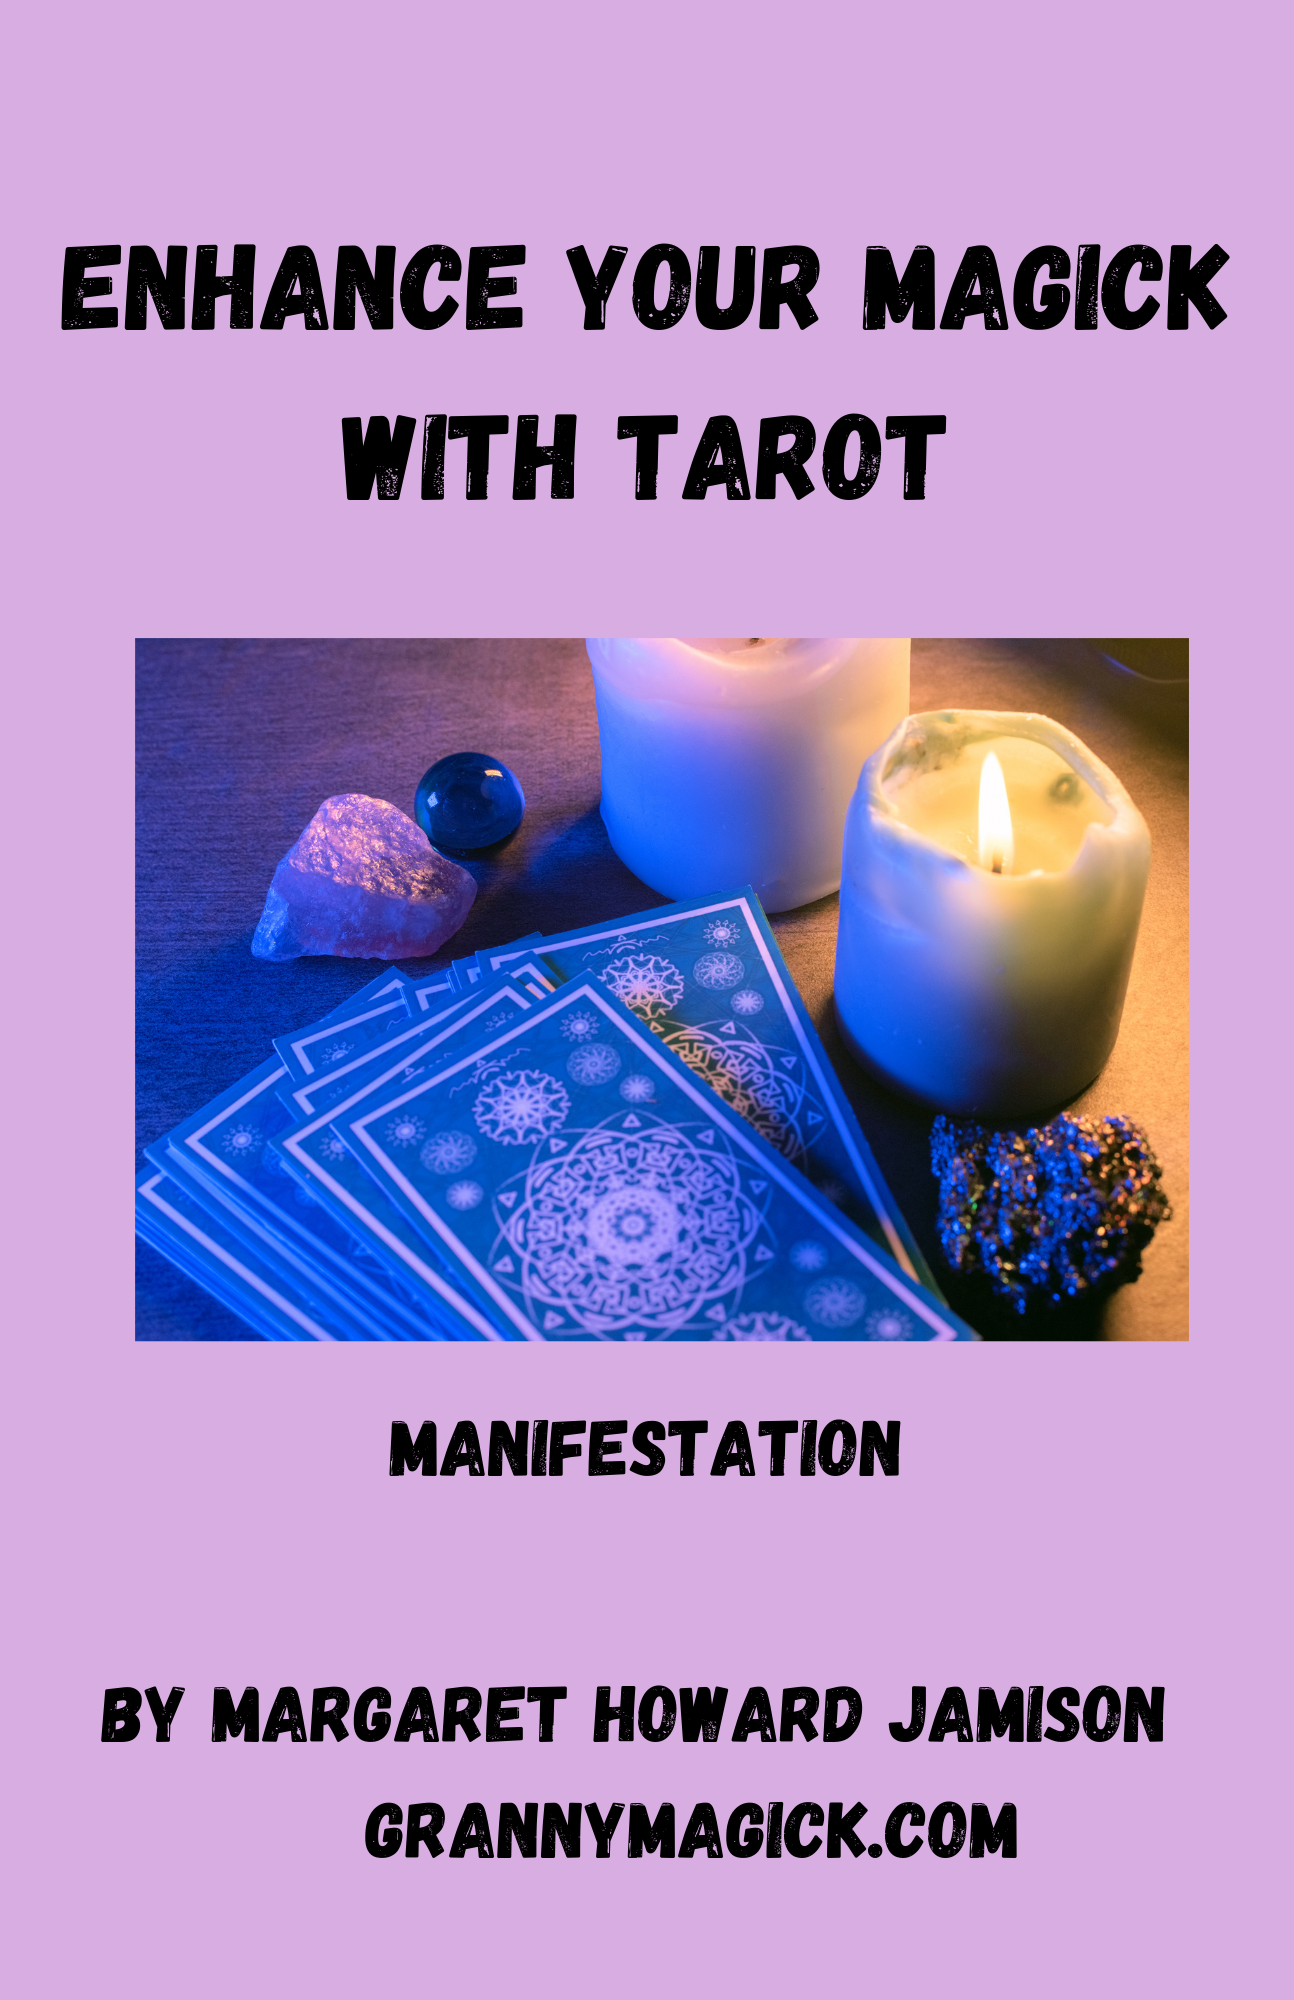 Ebook: Enhance Your Magick with Tarot: Spellwork, Manifestation, & More